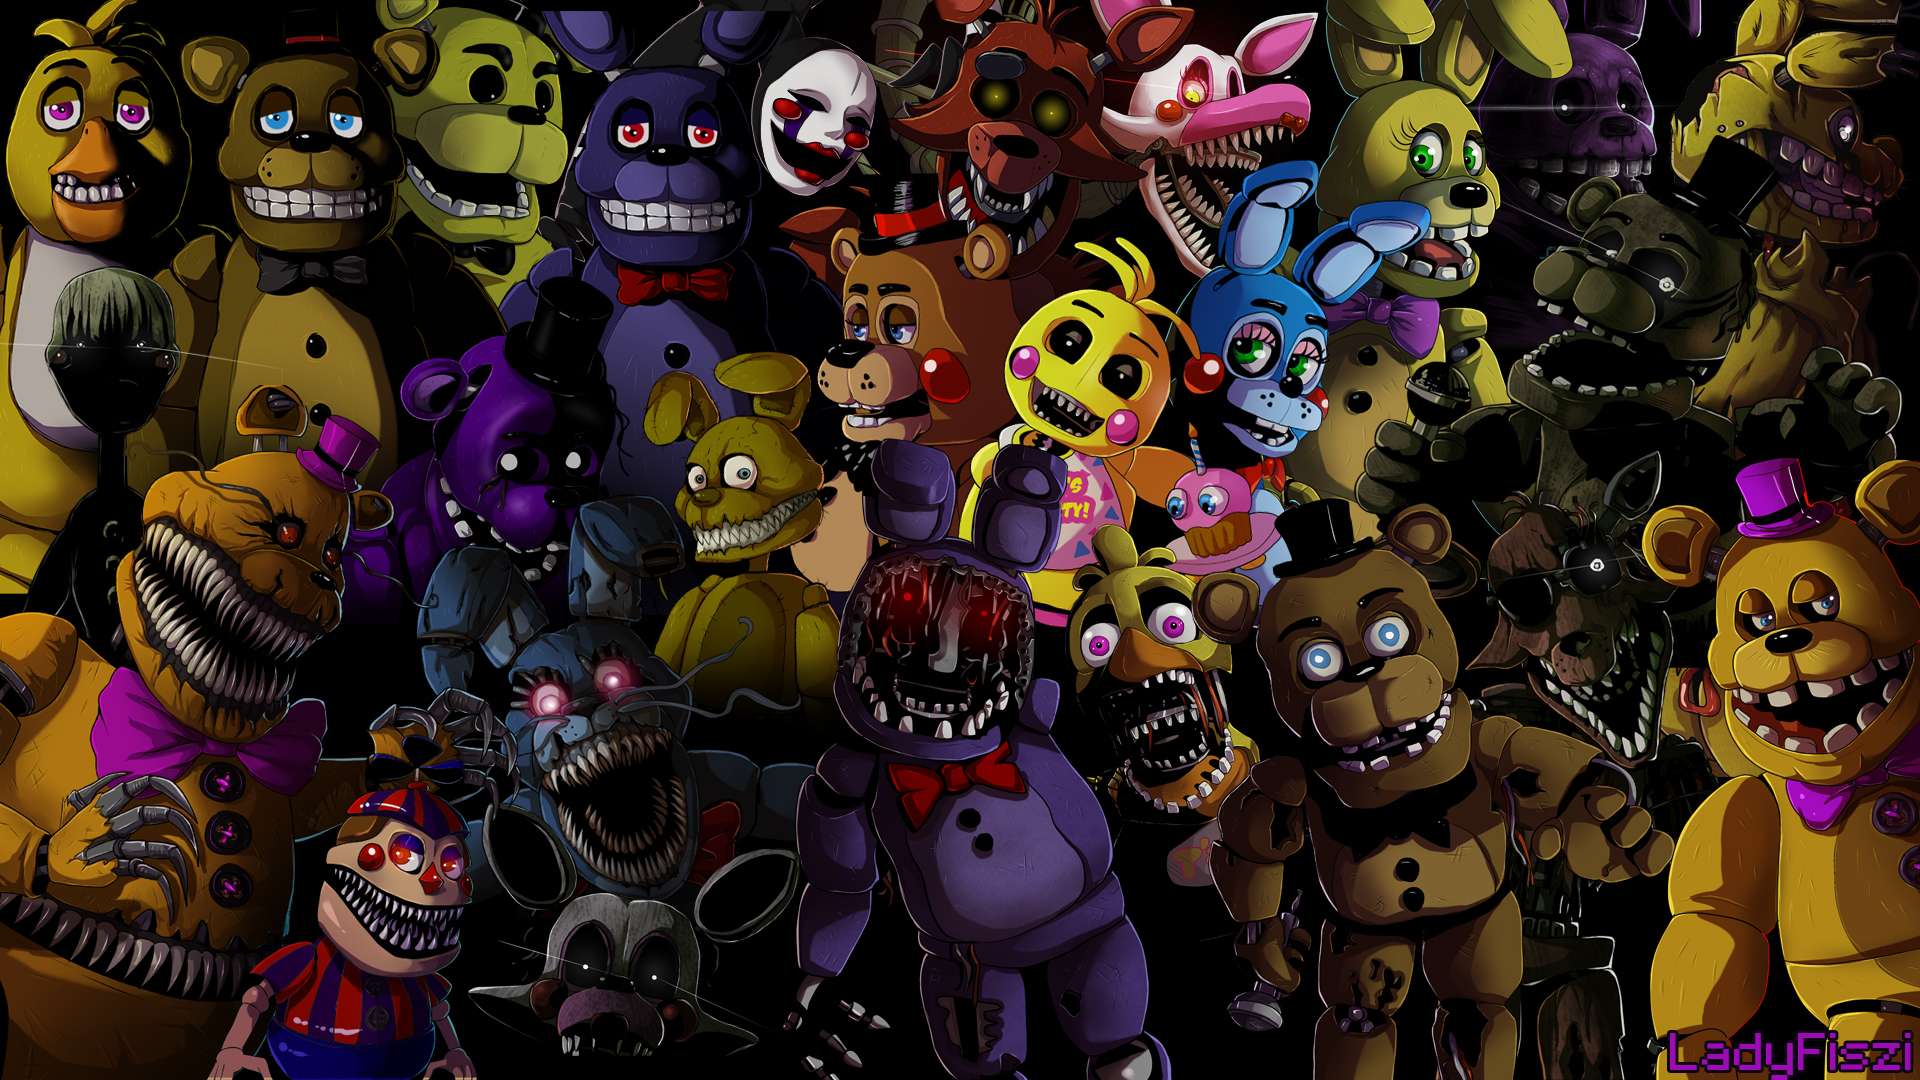 Most of the Five Nights at Freddy's Animatronics